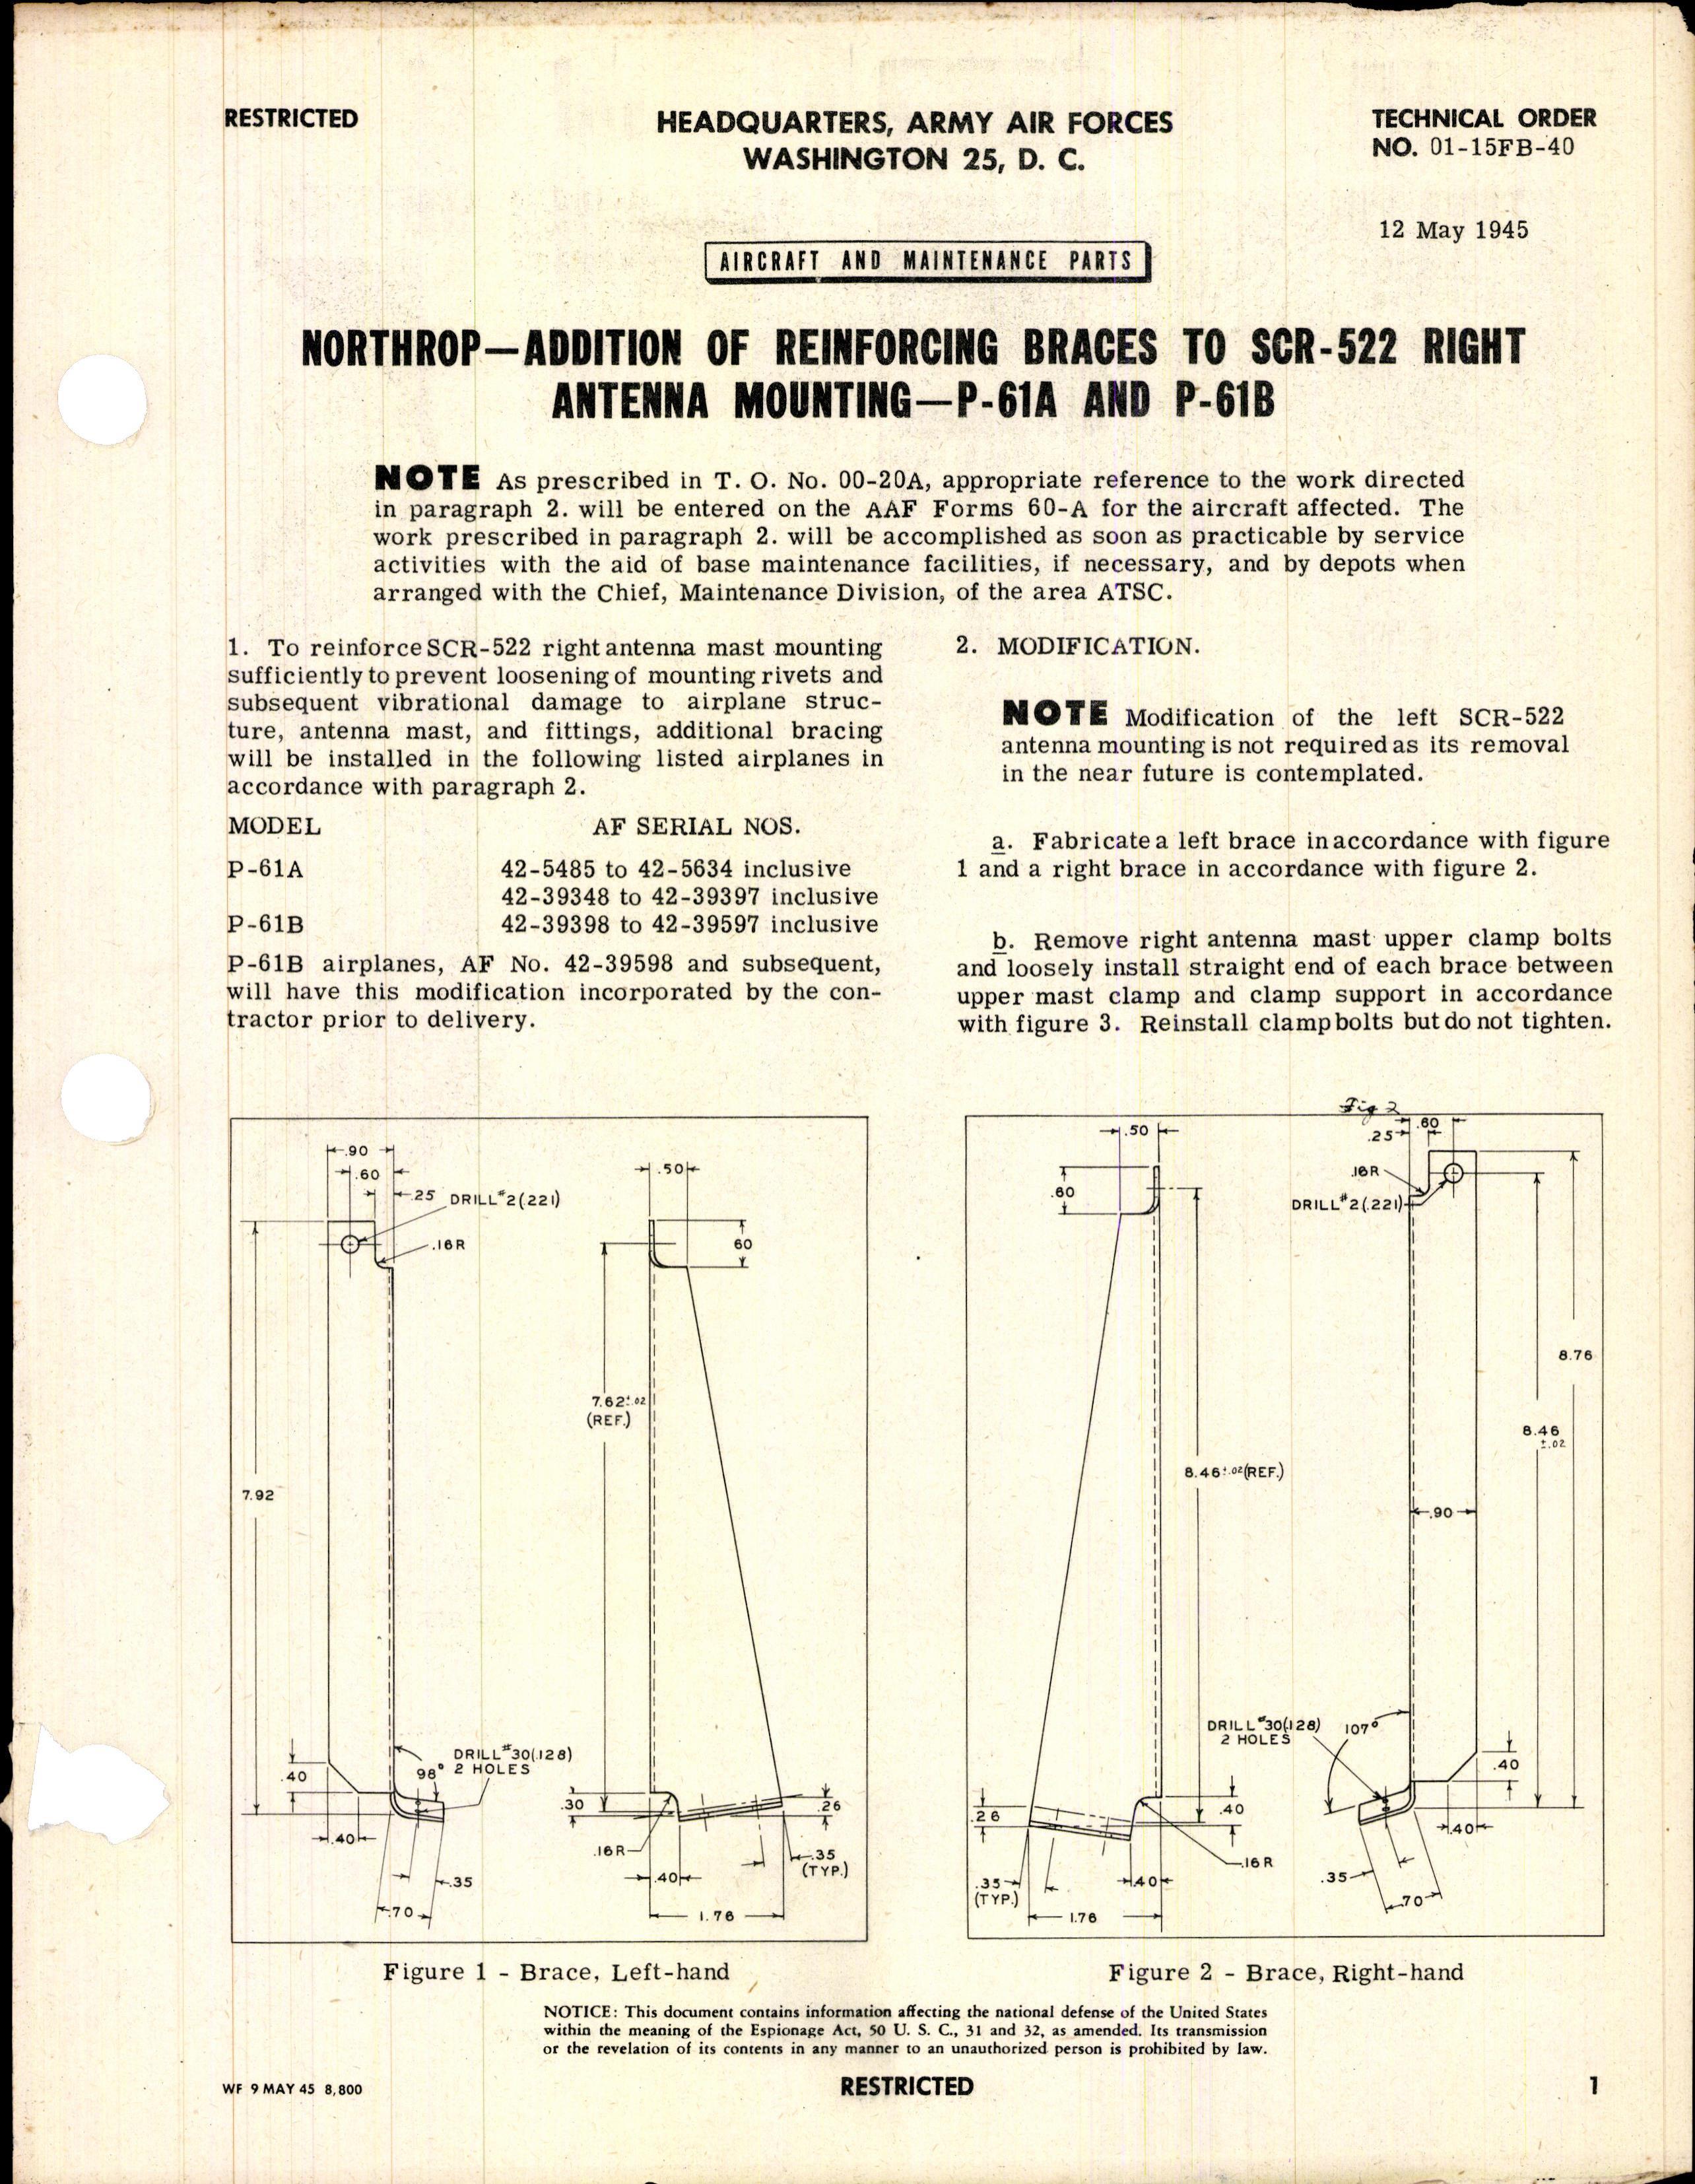 Sample page 1 from AirCorps Library document: Addition of Reinforcing Braces to SCR-522 Right Antenna Mounting for P-61A and P-51B